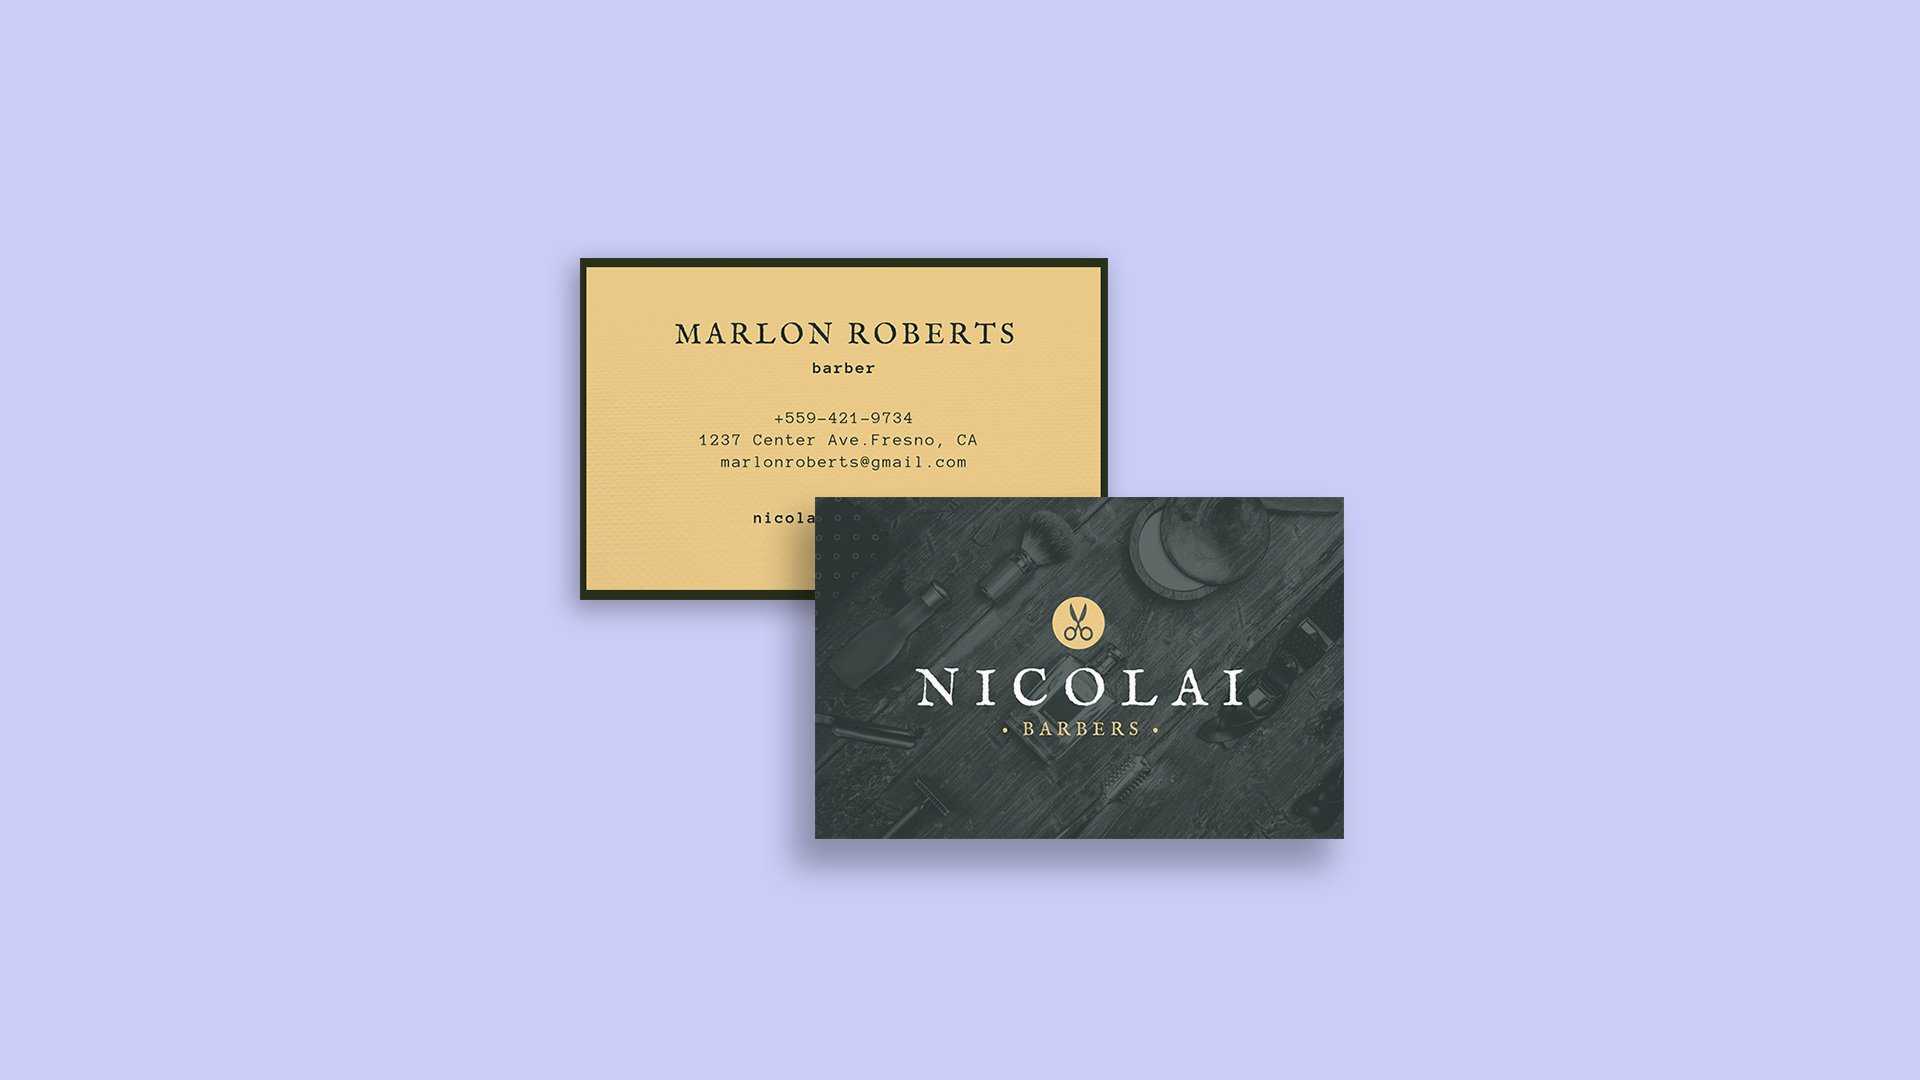 World's Most Famous People Business Cards – Learn In Freelance Business Card Template